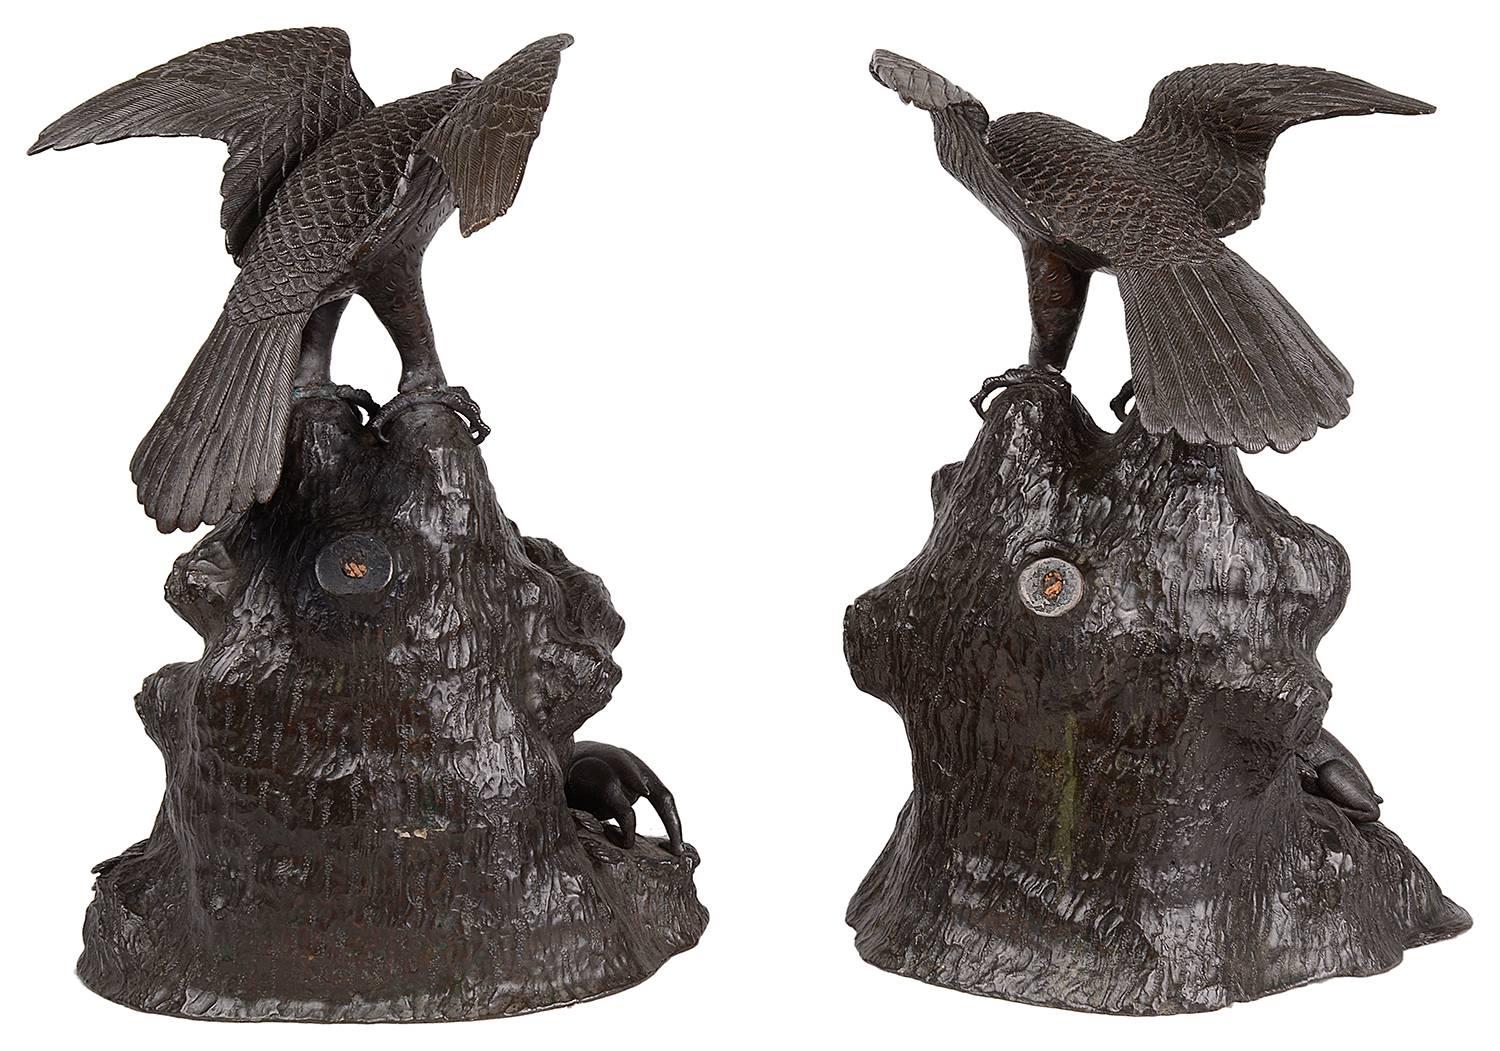 A very good quality pair of 19th Century Japanese bronze Eagles, Meiji period (1868-1912) Each with out spread wings and raised on a rocky outcrop.